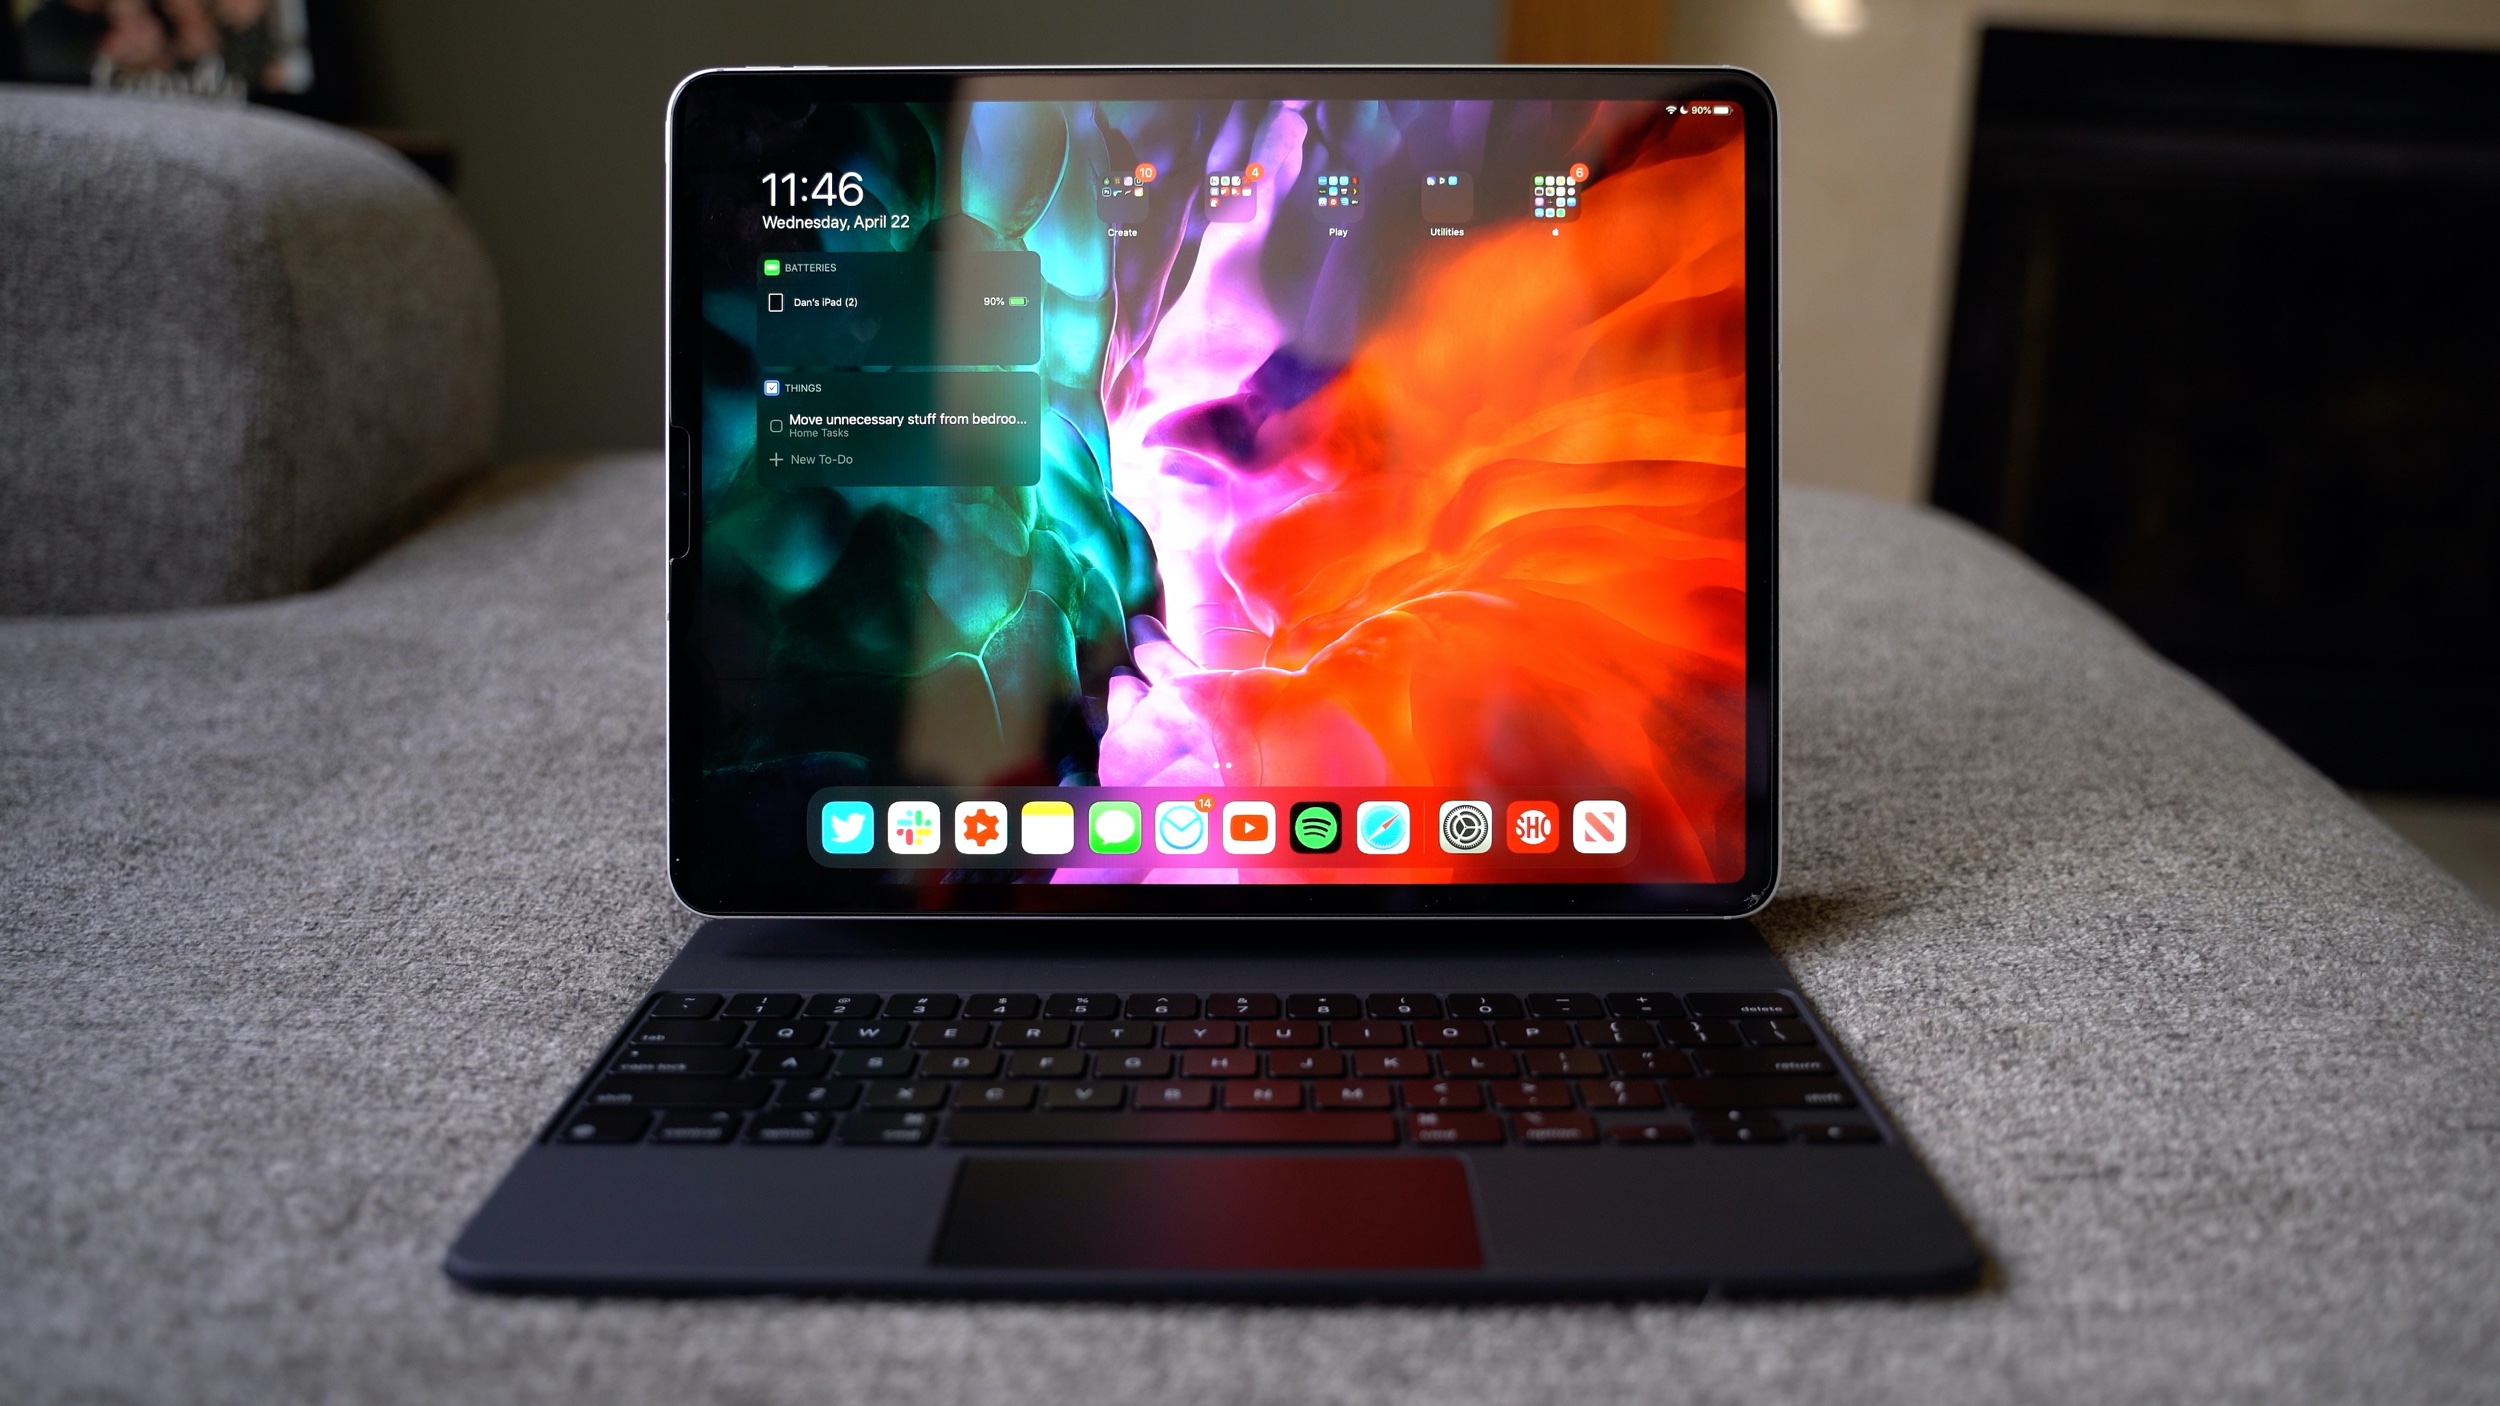 Apple Patent Suggests Future iPad Could Transform Into macOS-Like Experience When Attached to a Keyboard